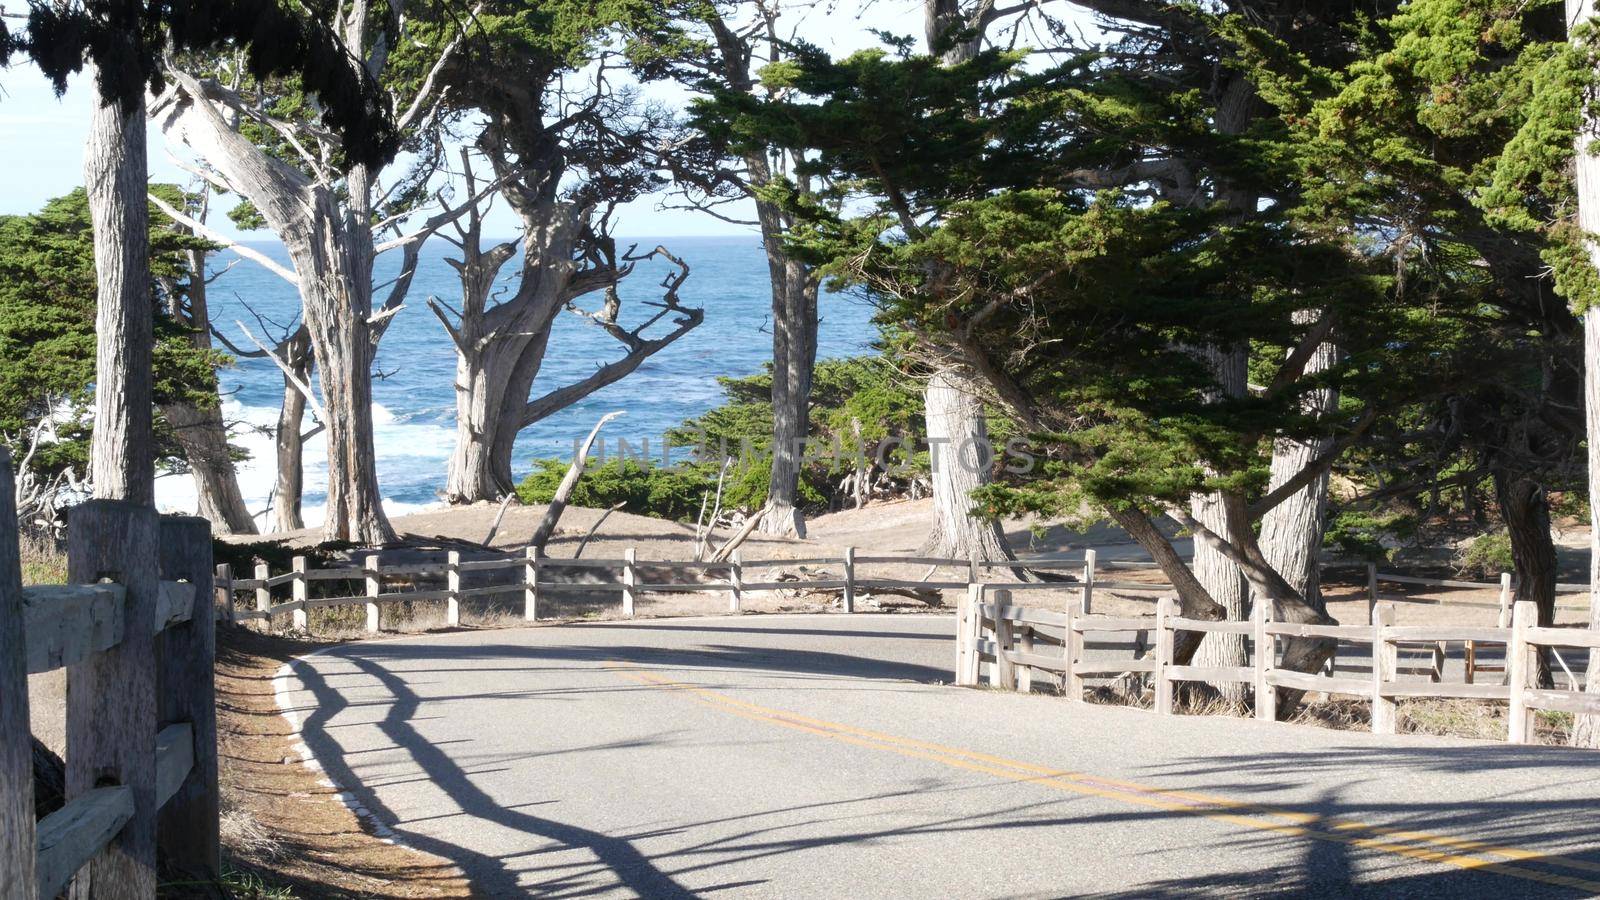 17-mile drive scenic road, Monterey, California. Cypress or pine trees and ocean by DogoraSun